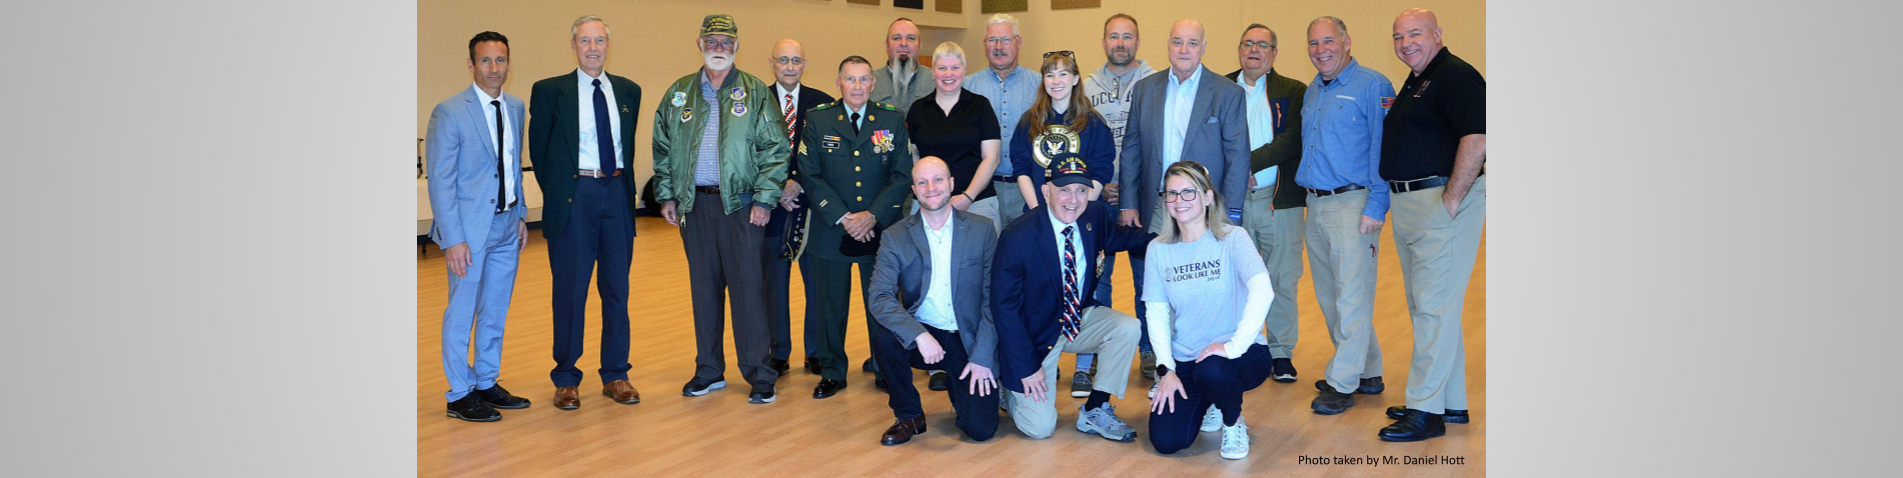 Staff and Veterans pose for a group photo